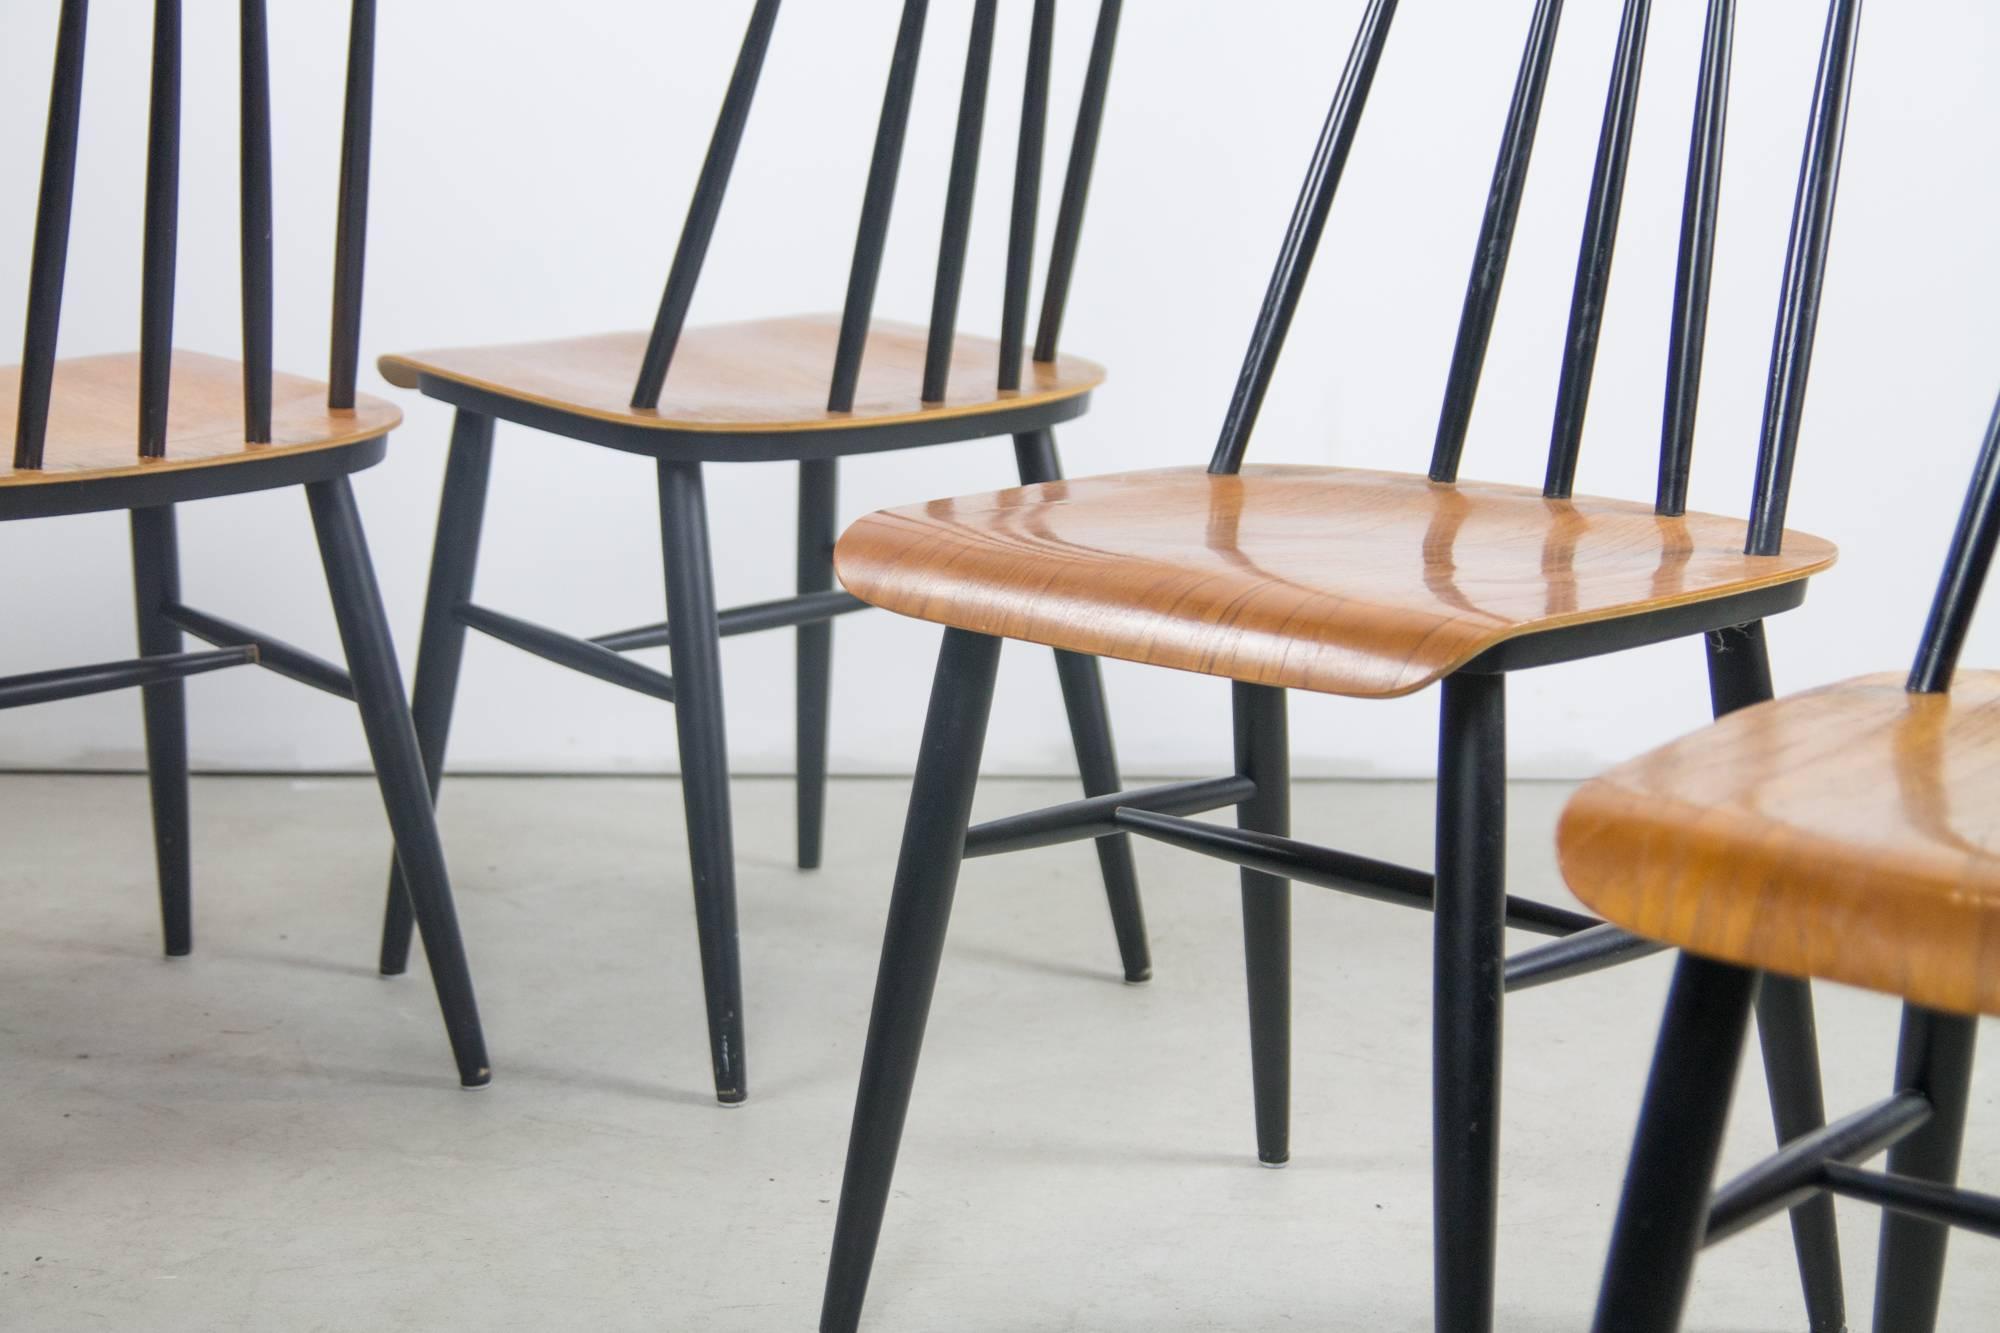 A set of four Fanett dining chairs by Ilmari Tapiovaara. The natural wood of the bent-plywood seats and top rails Stand out as set against black lacquered legs, stretchers and spindles. These do much to retain a traditional Scandinavian form while